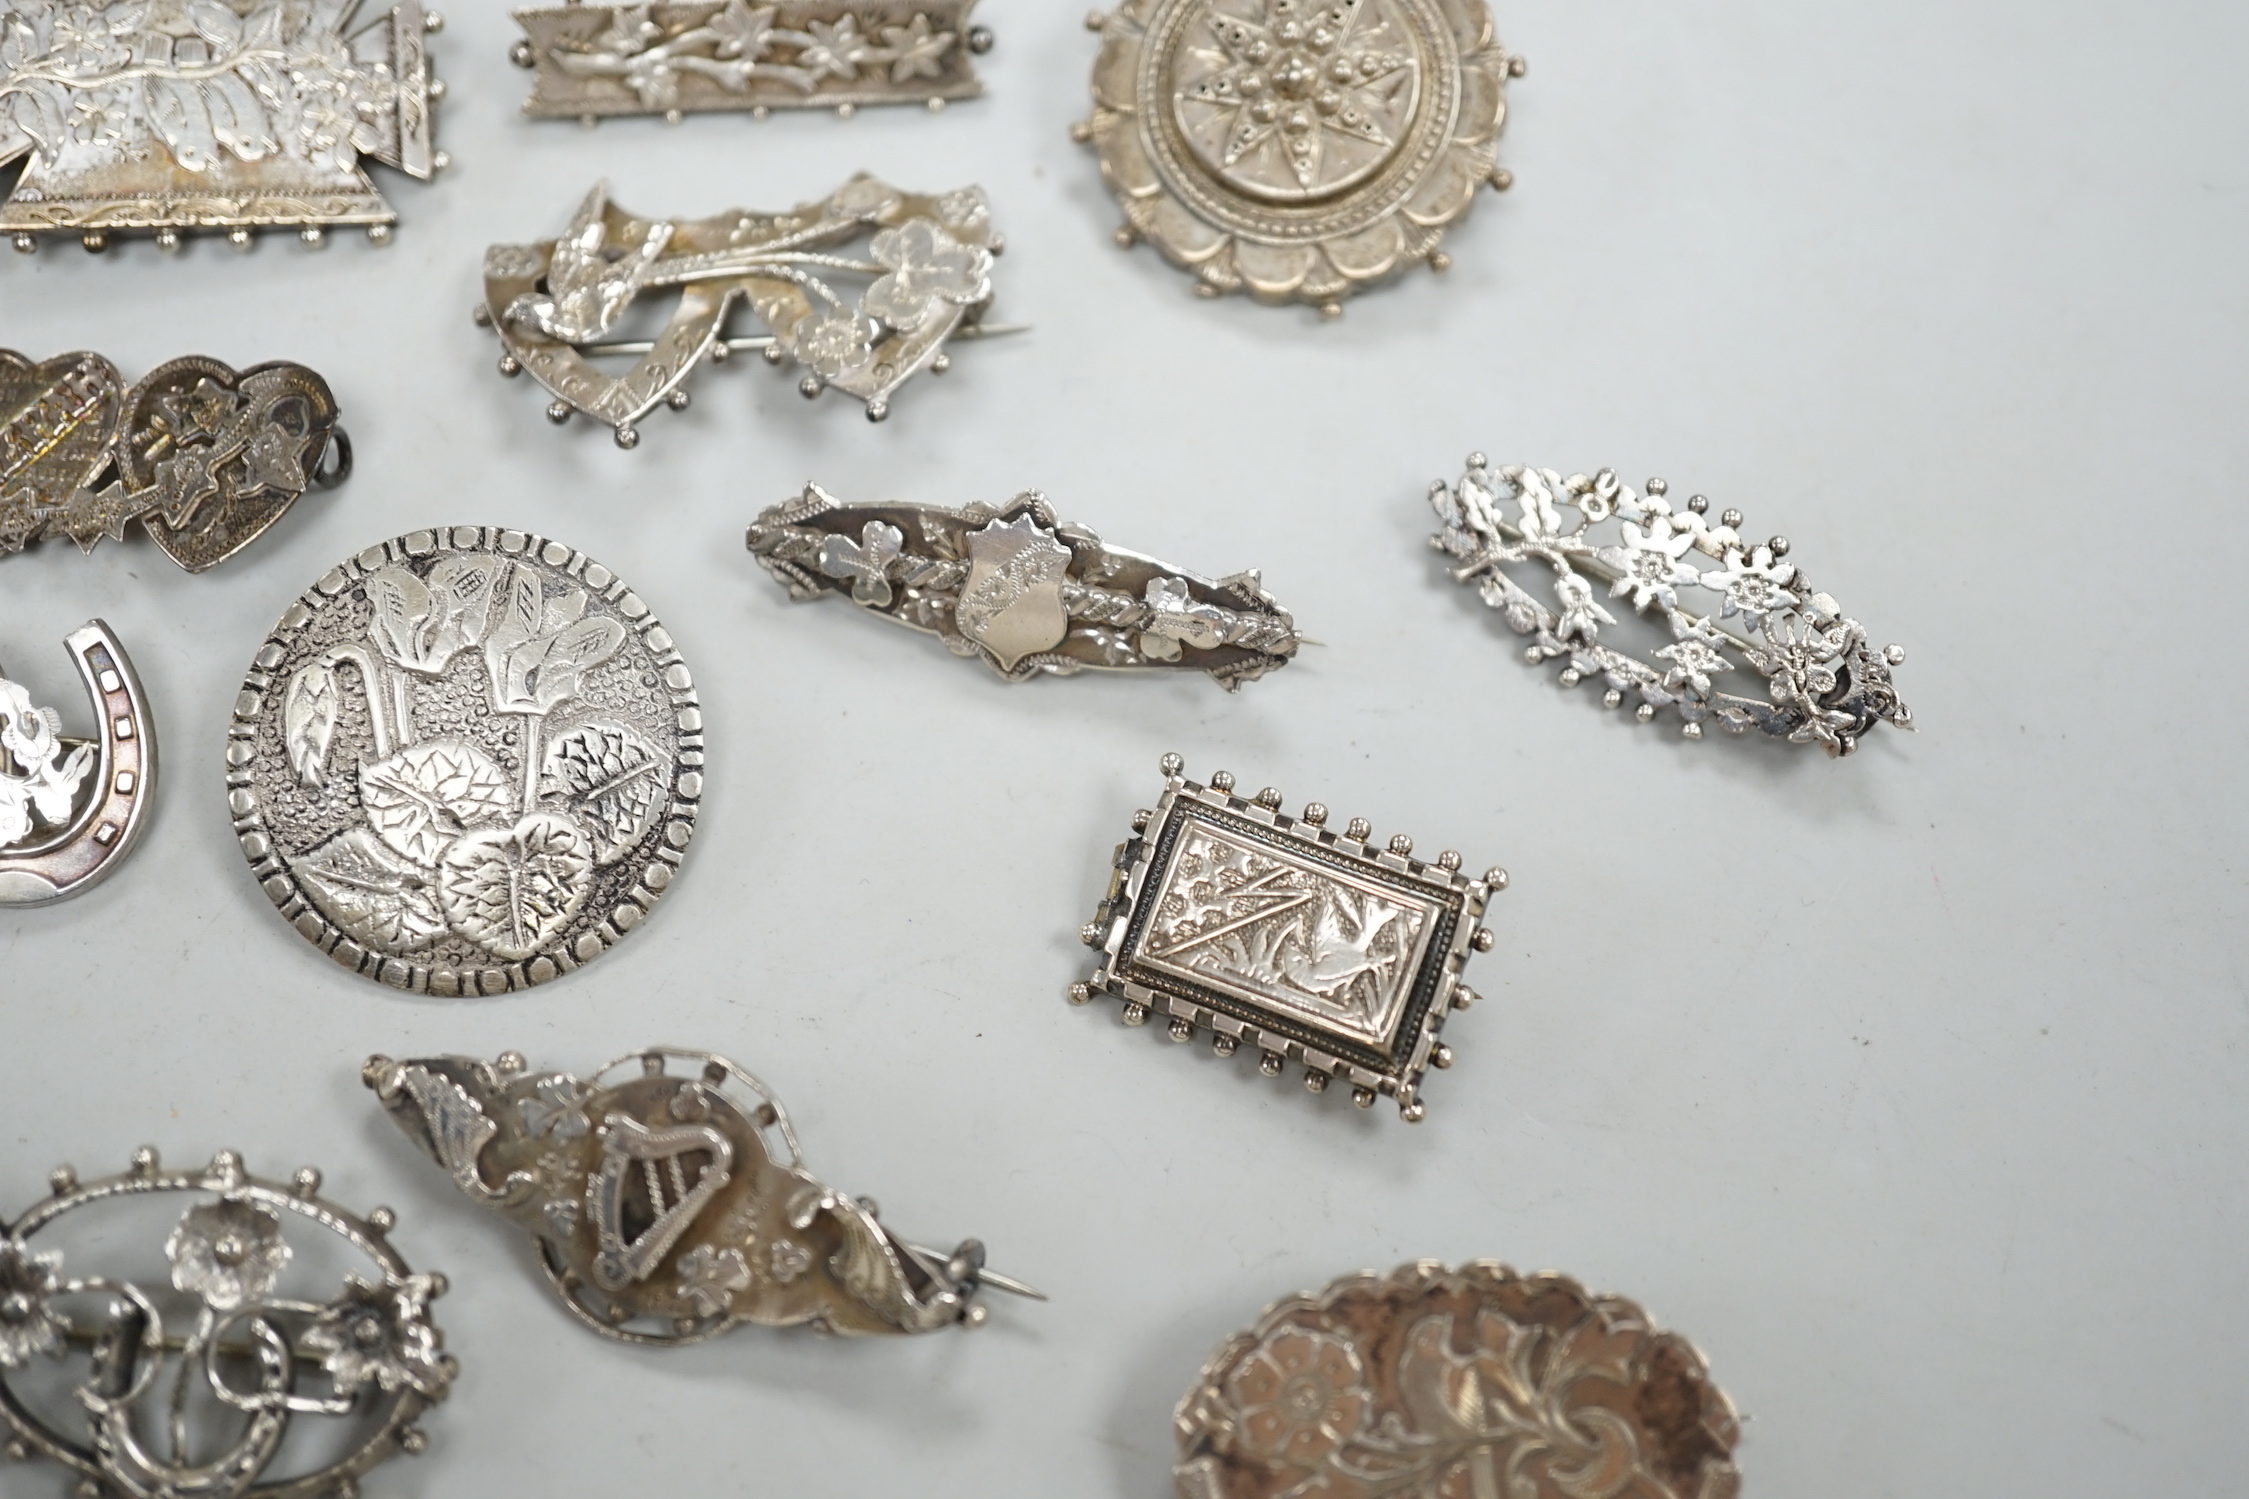 A small collection of twenty nine assorted Victorian and later silver or white metal brooches.